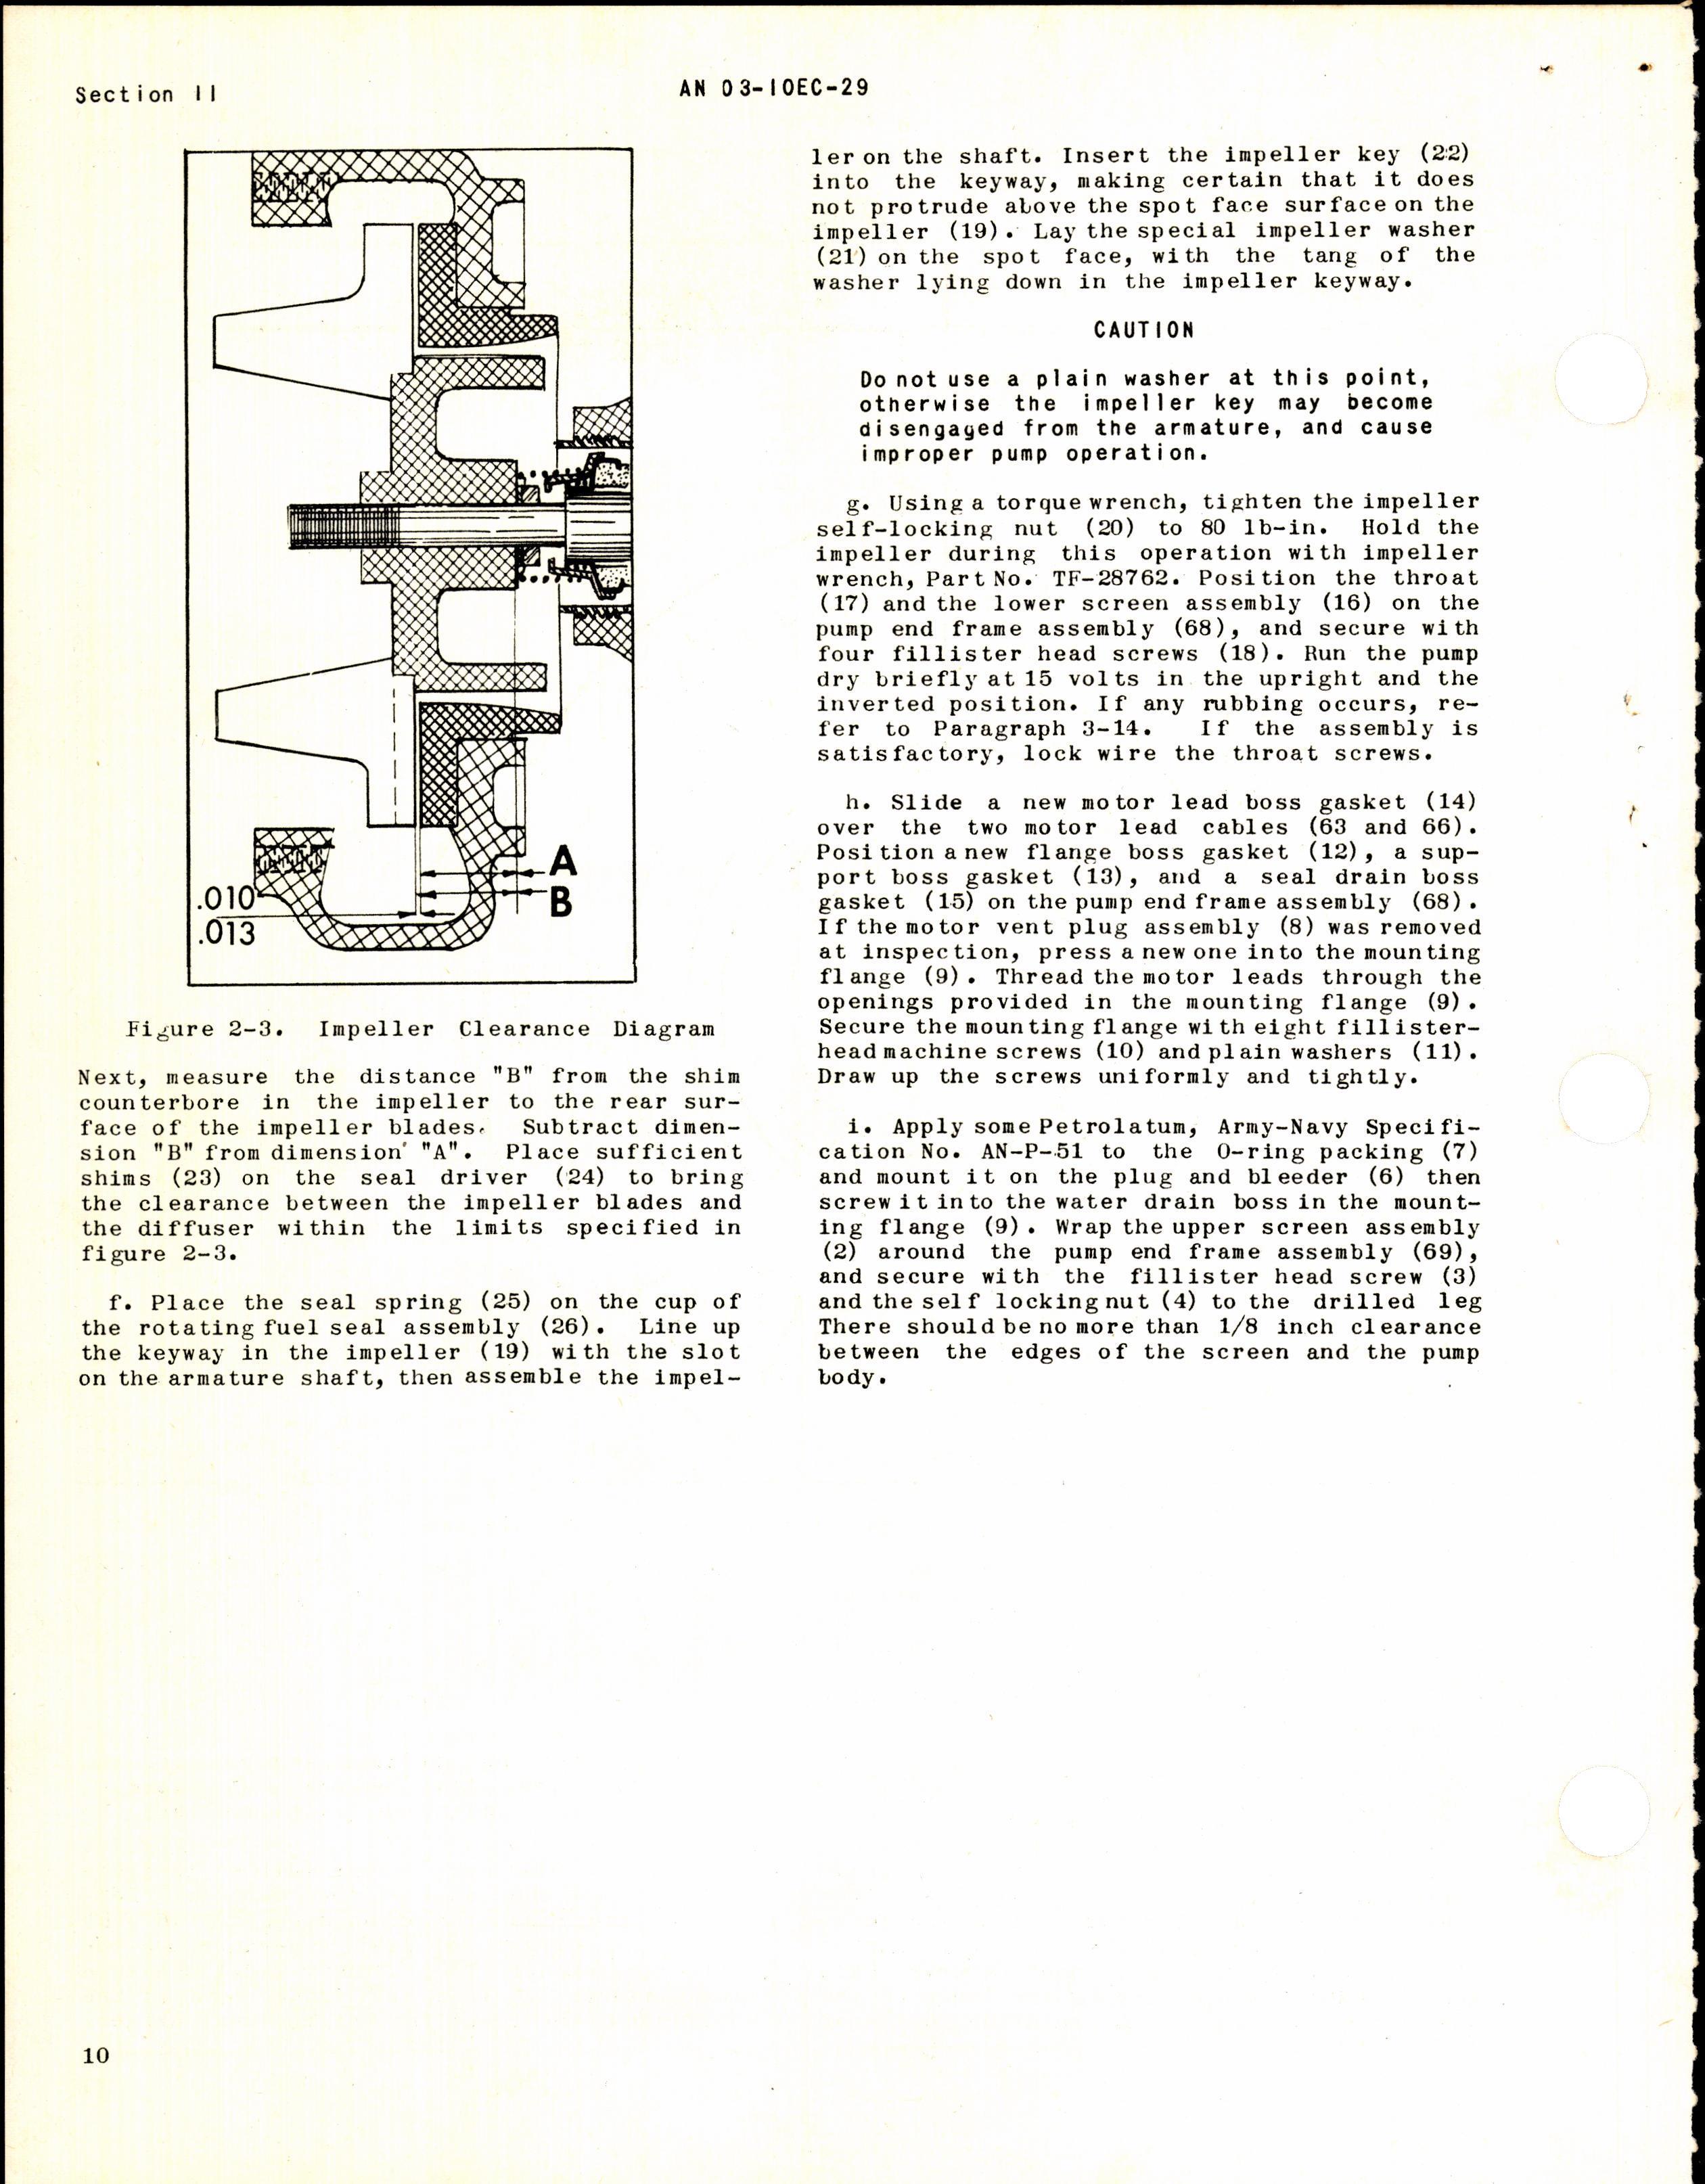 Sample page 28 from AirCorps Library document: Overhaul Instructions for Refueling & Booster Pumps